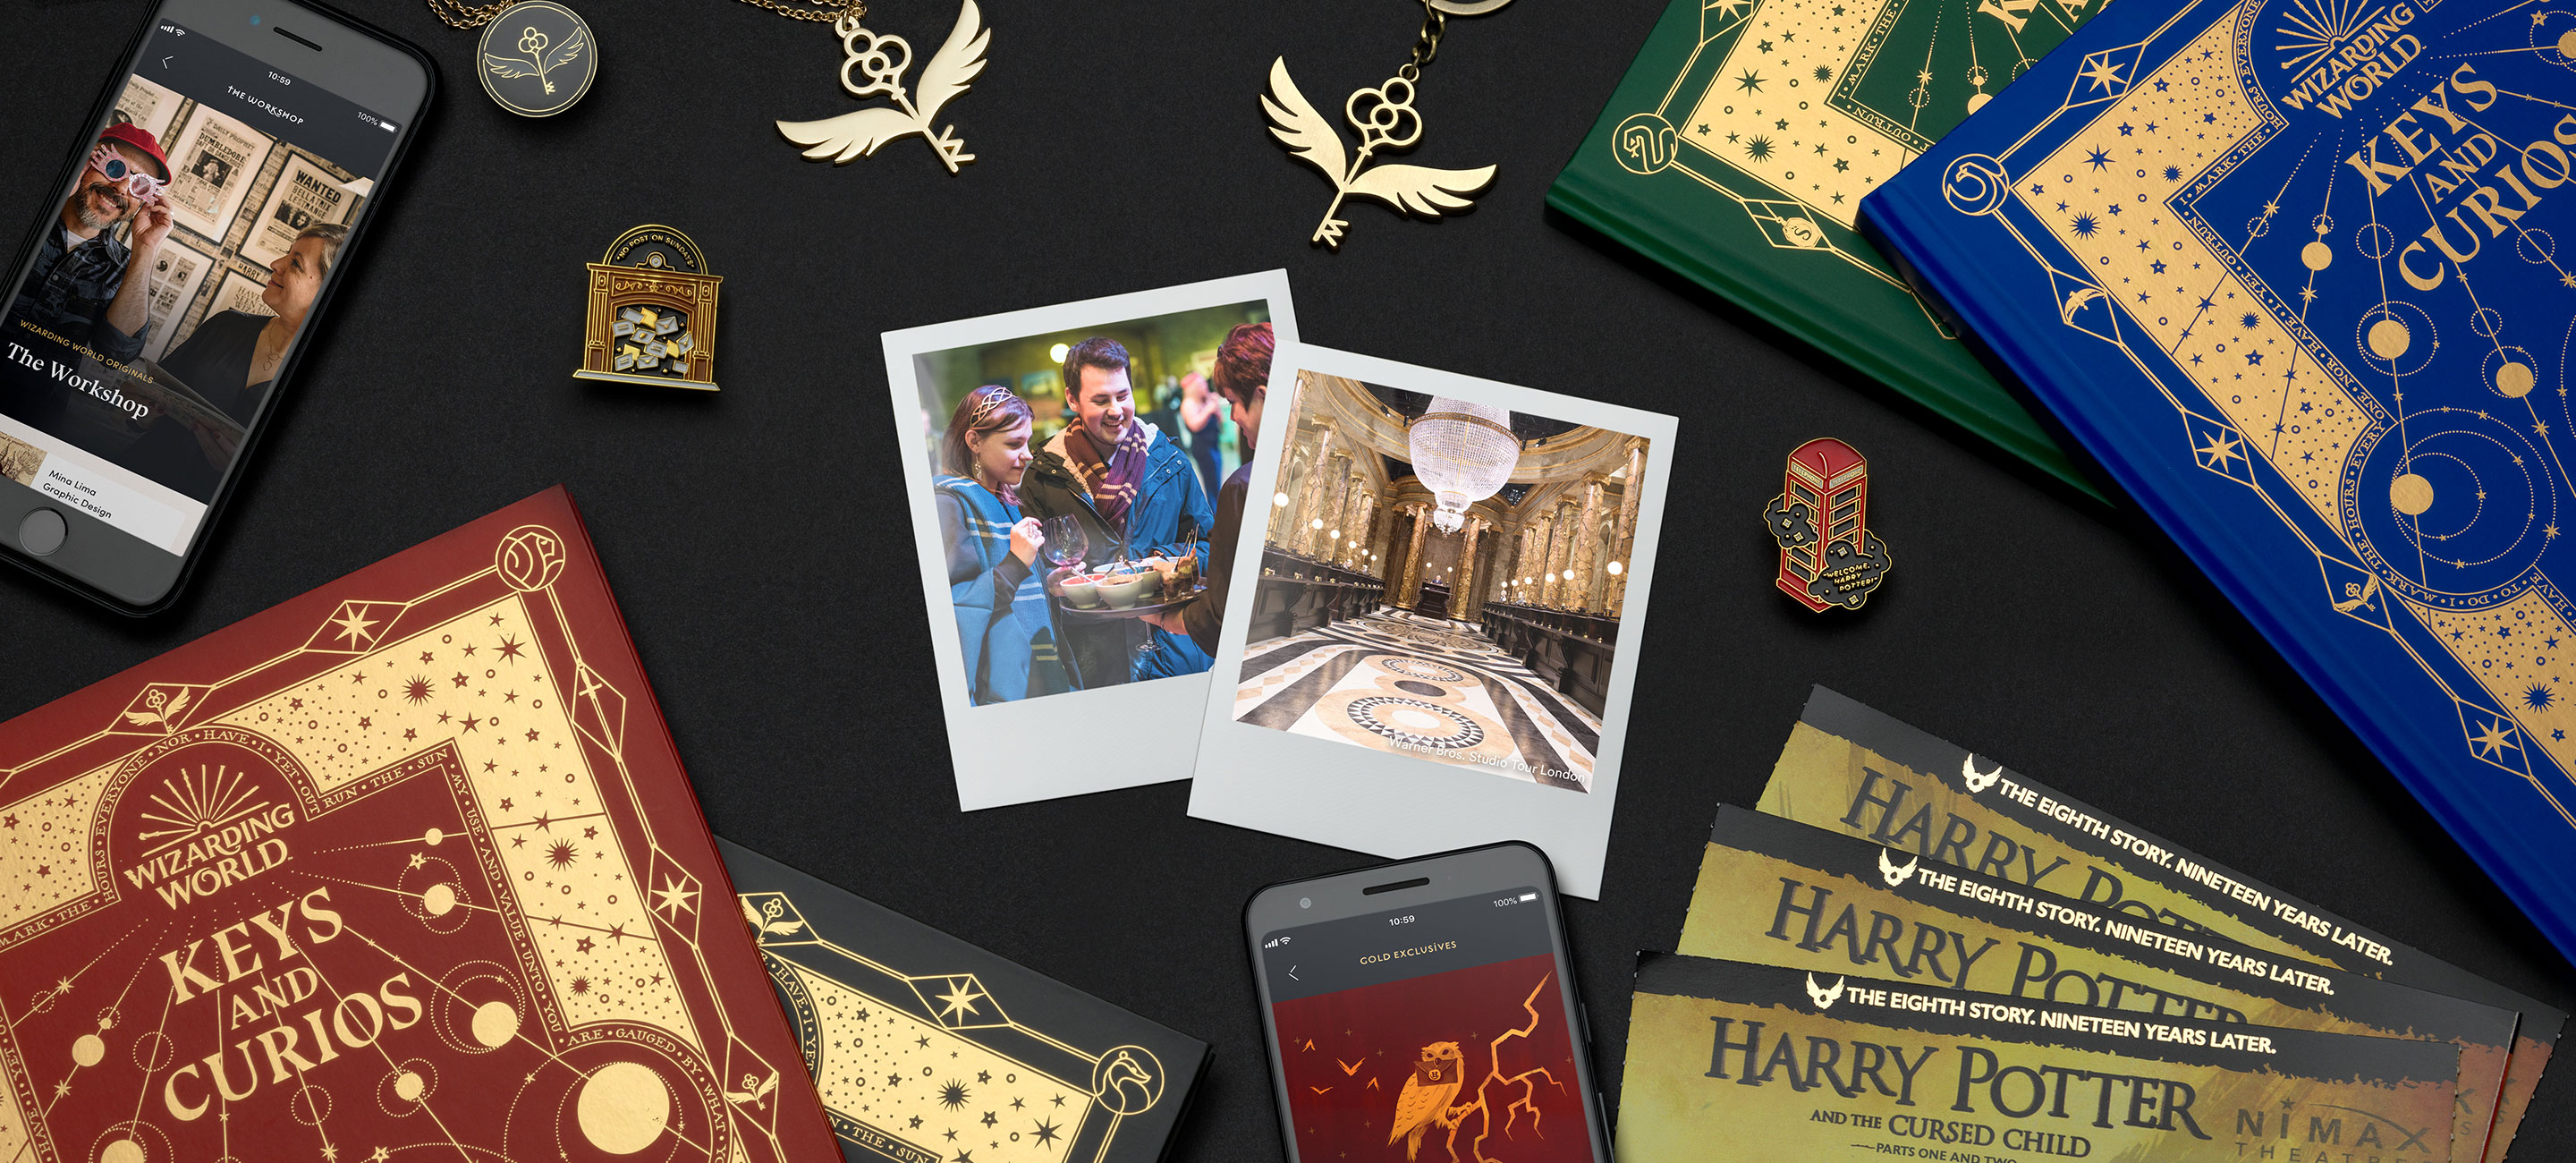 Official Harry Potter Fan Club Launched By Wizarding World Digital